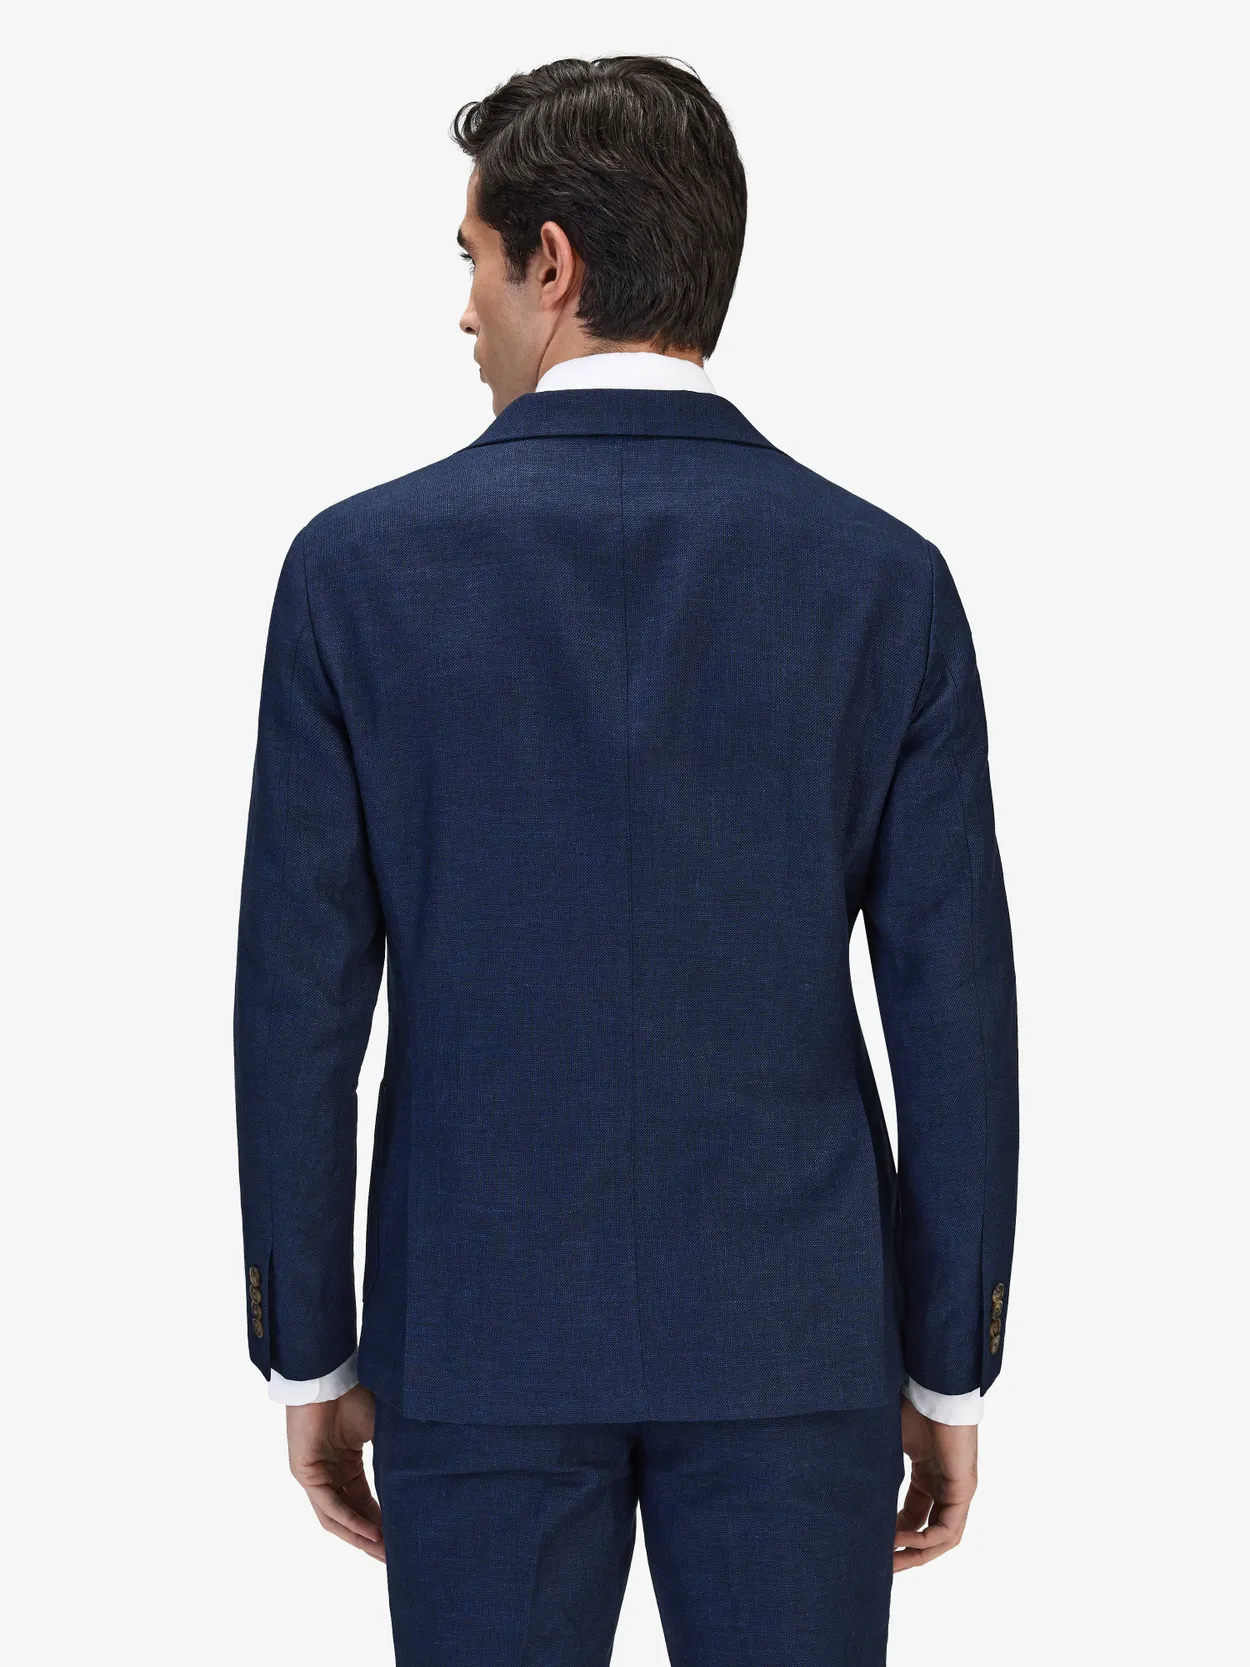 Image number 3 for product Blue Linen Suit & Shirt